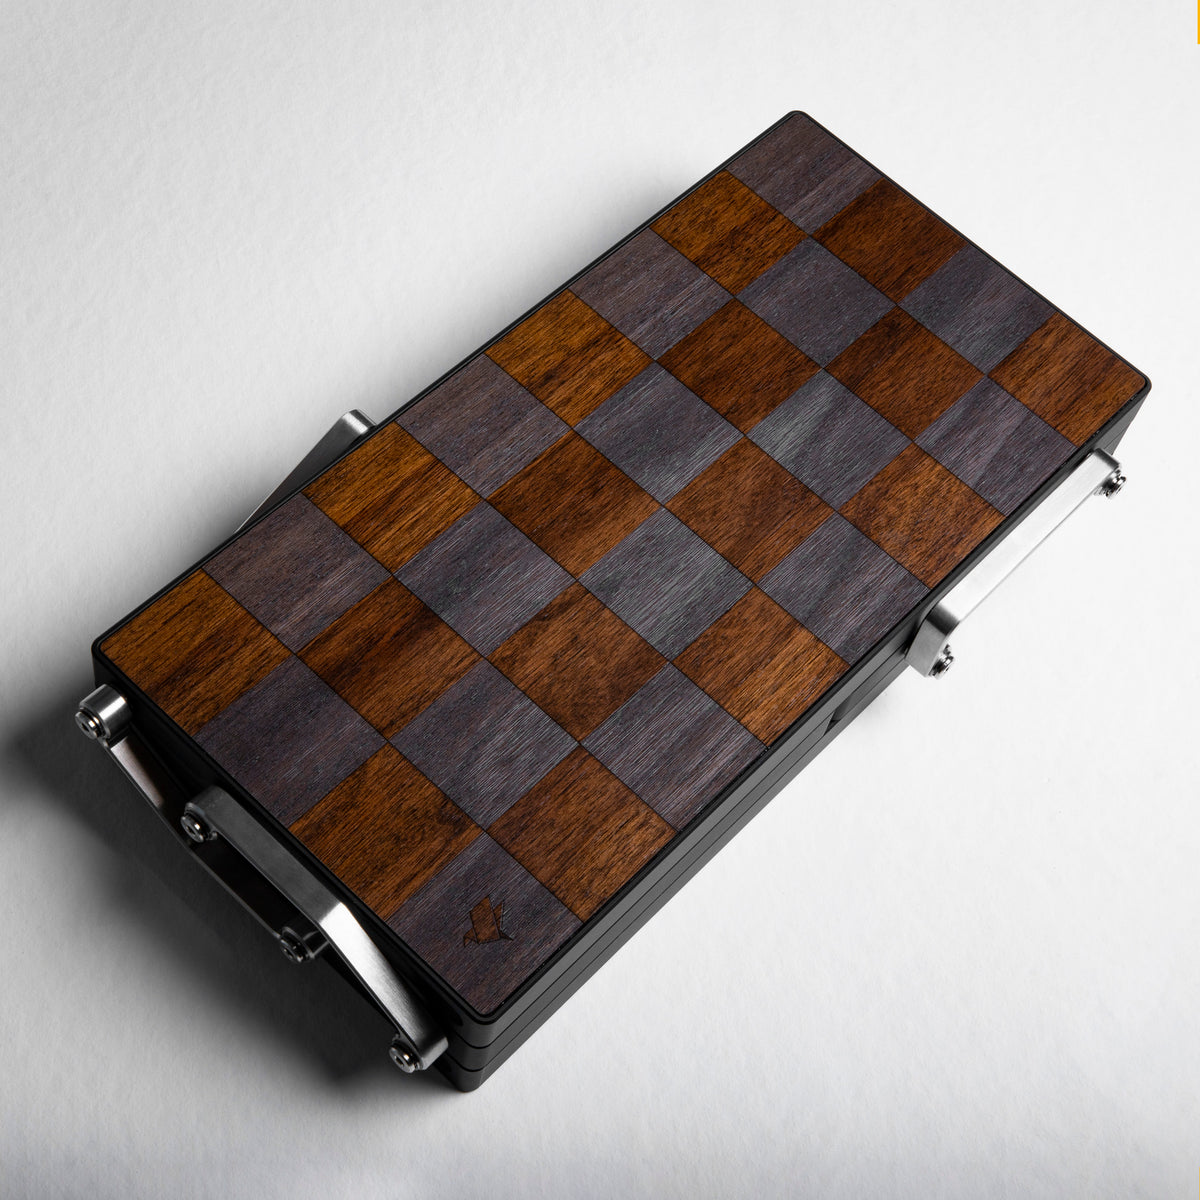 Kinetic Chess Set – MB&F M.A.D.Gallery e-shop